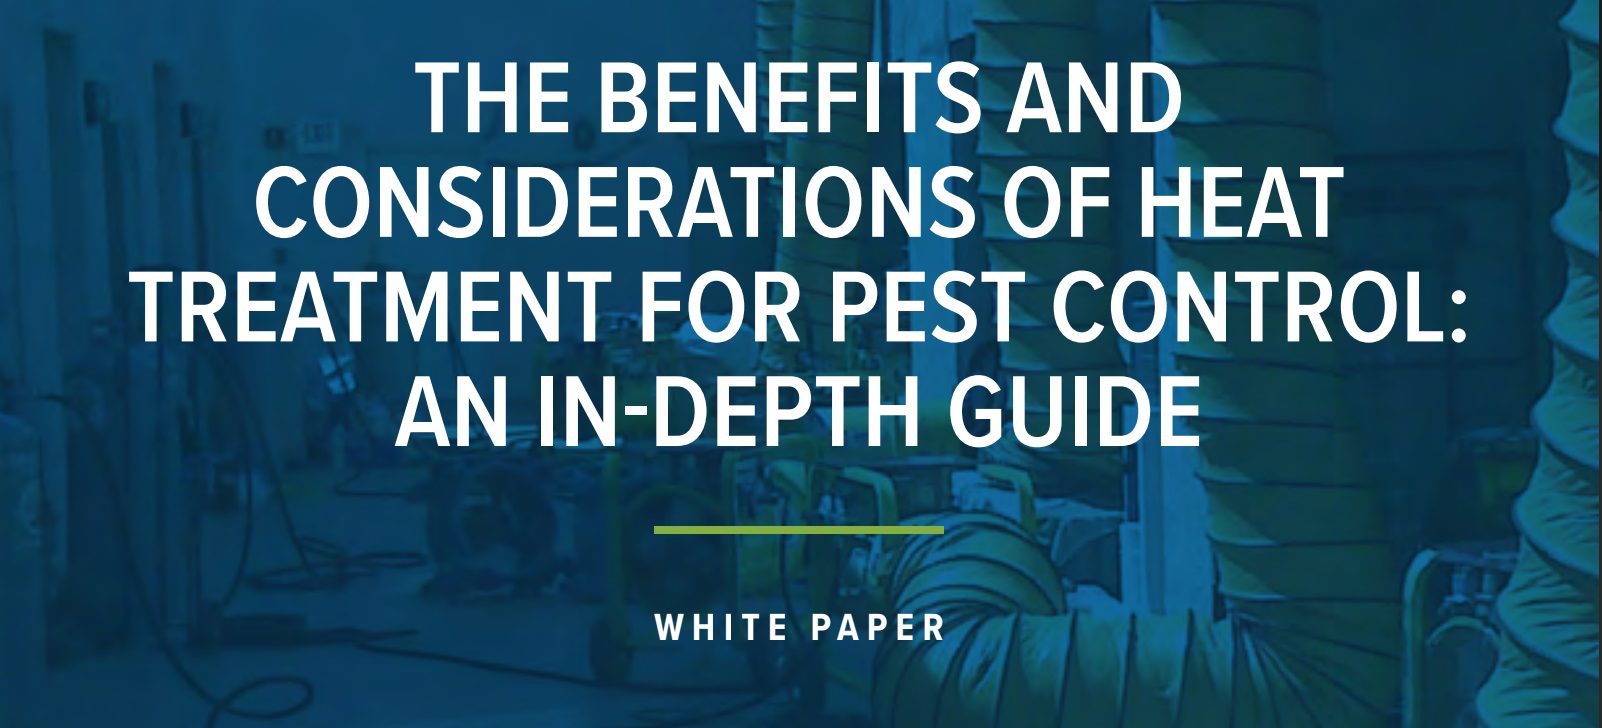 The benefits and considerations of heat treatment for pest control: an in-depth guide